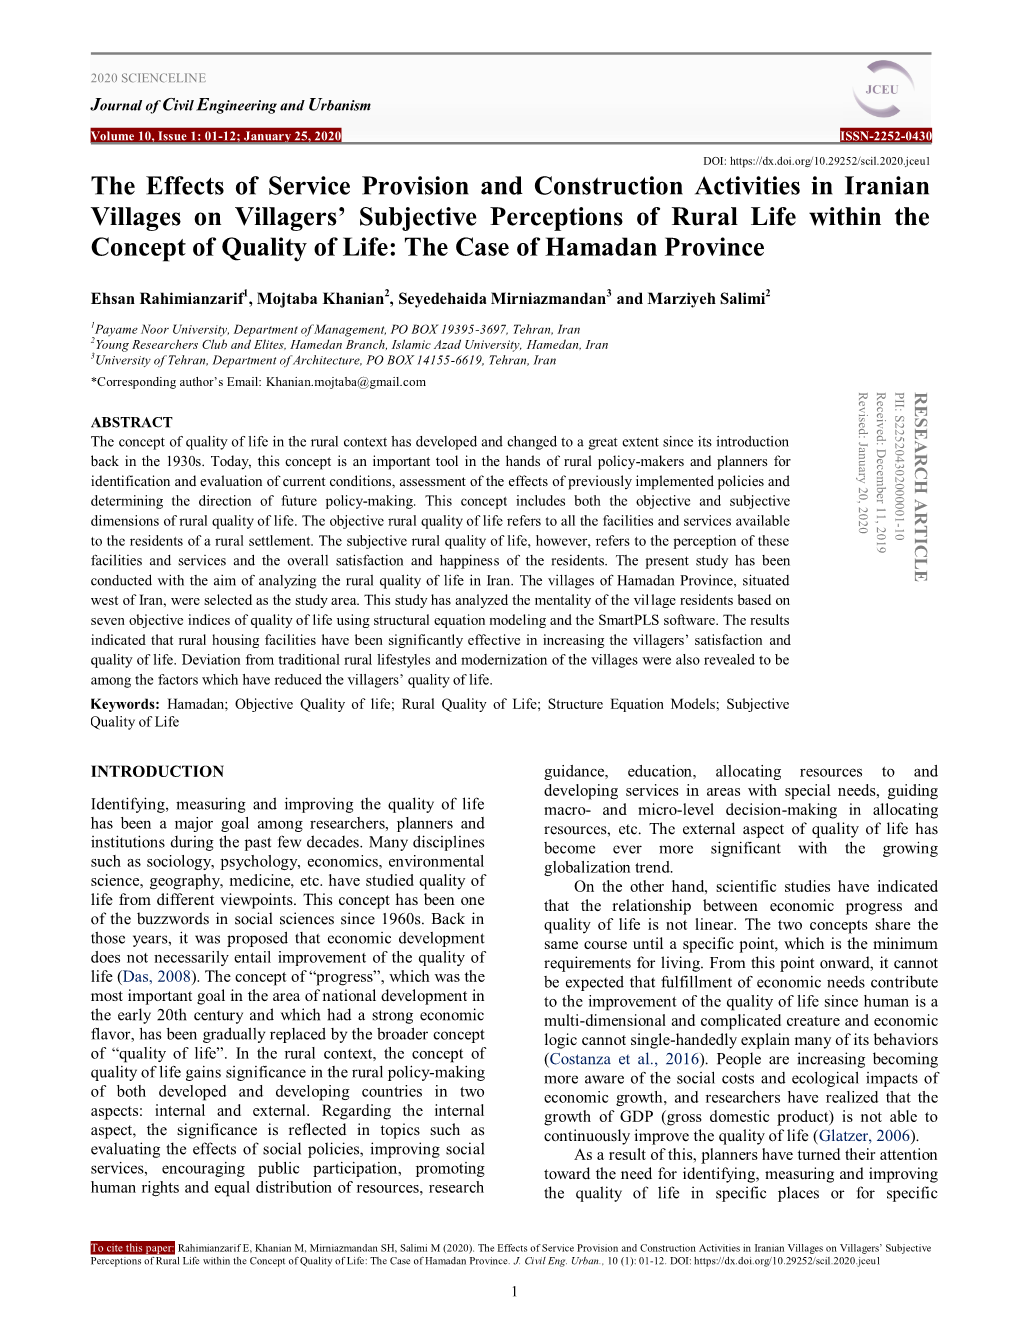 The Effects of Service Provision and Construction Activities in Iranian